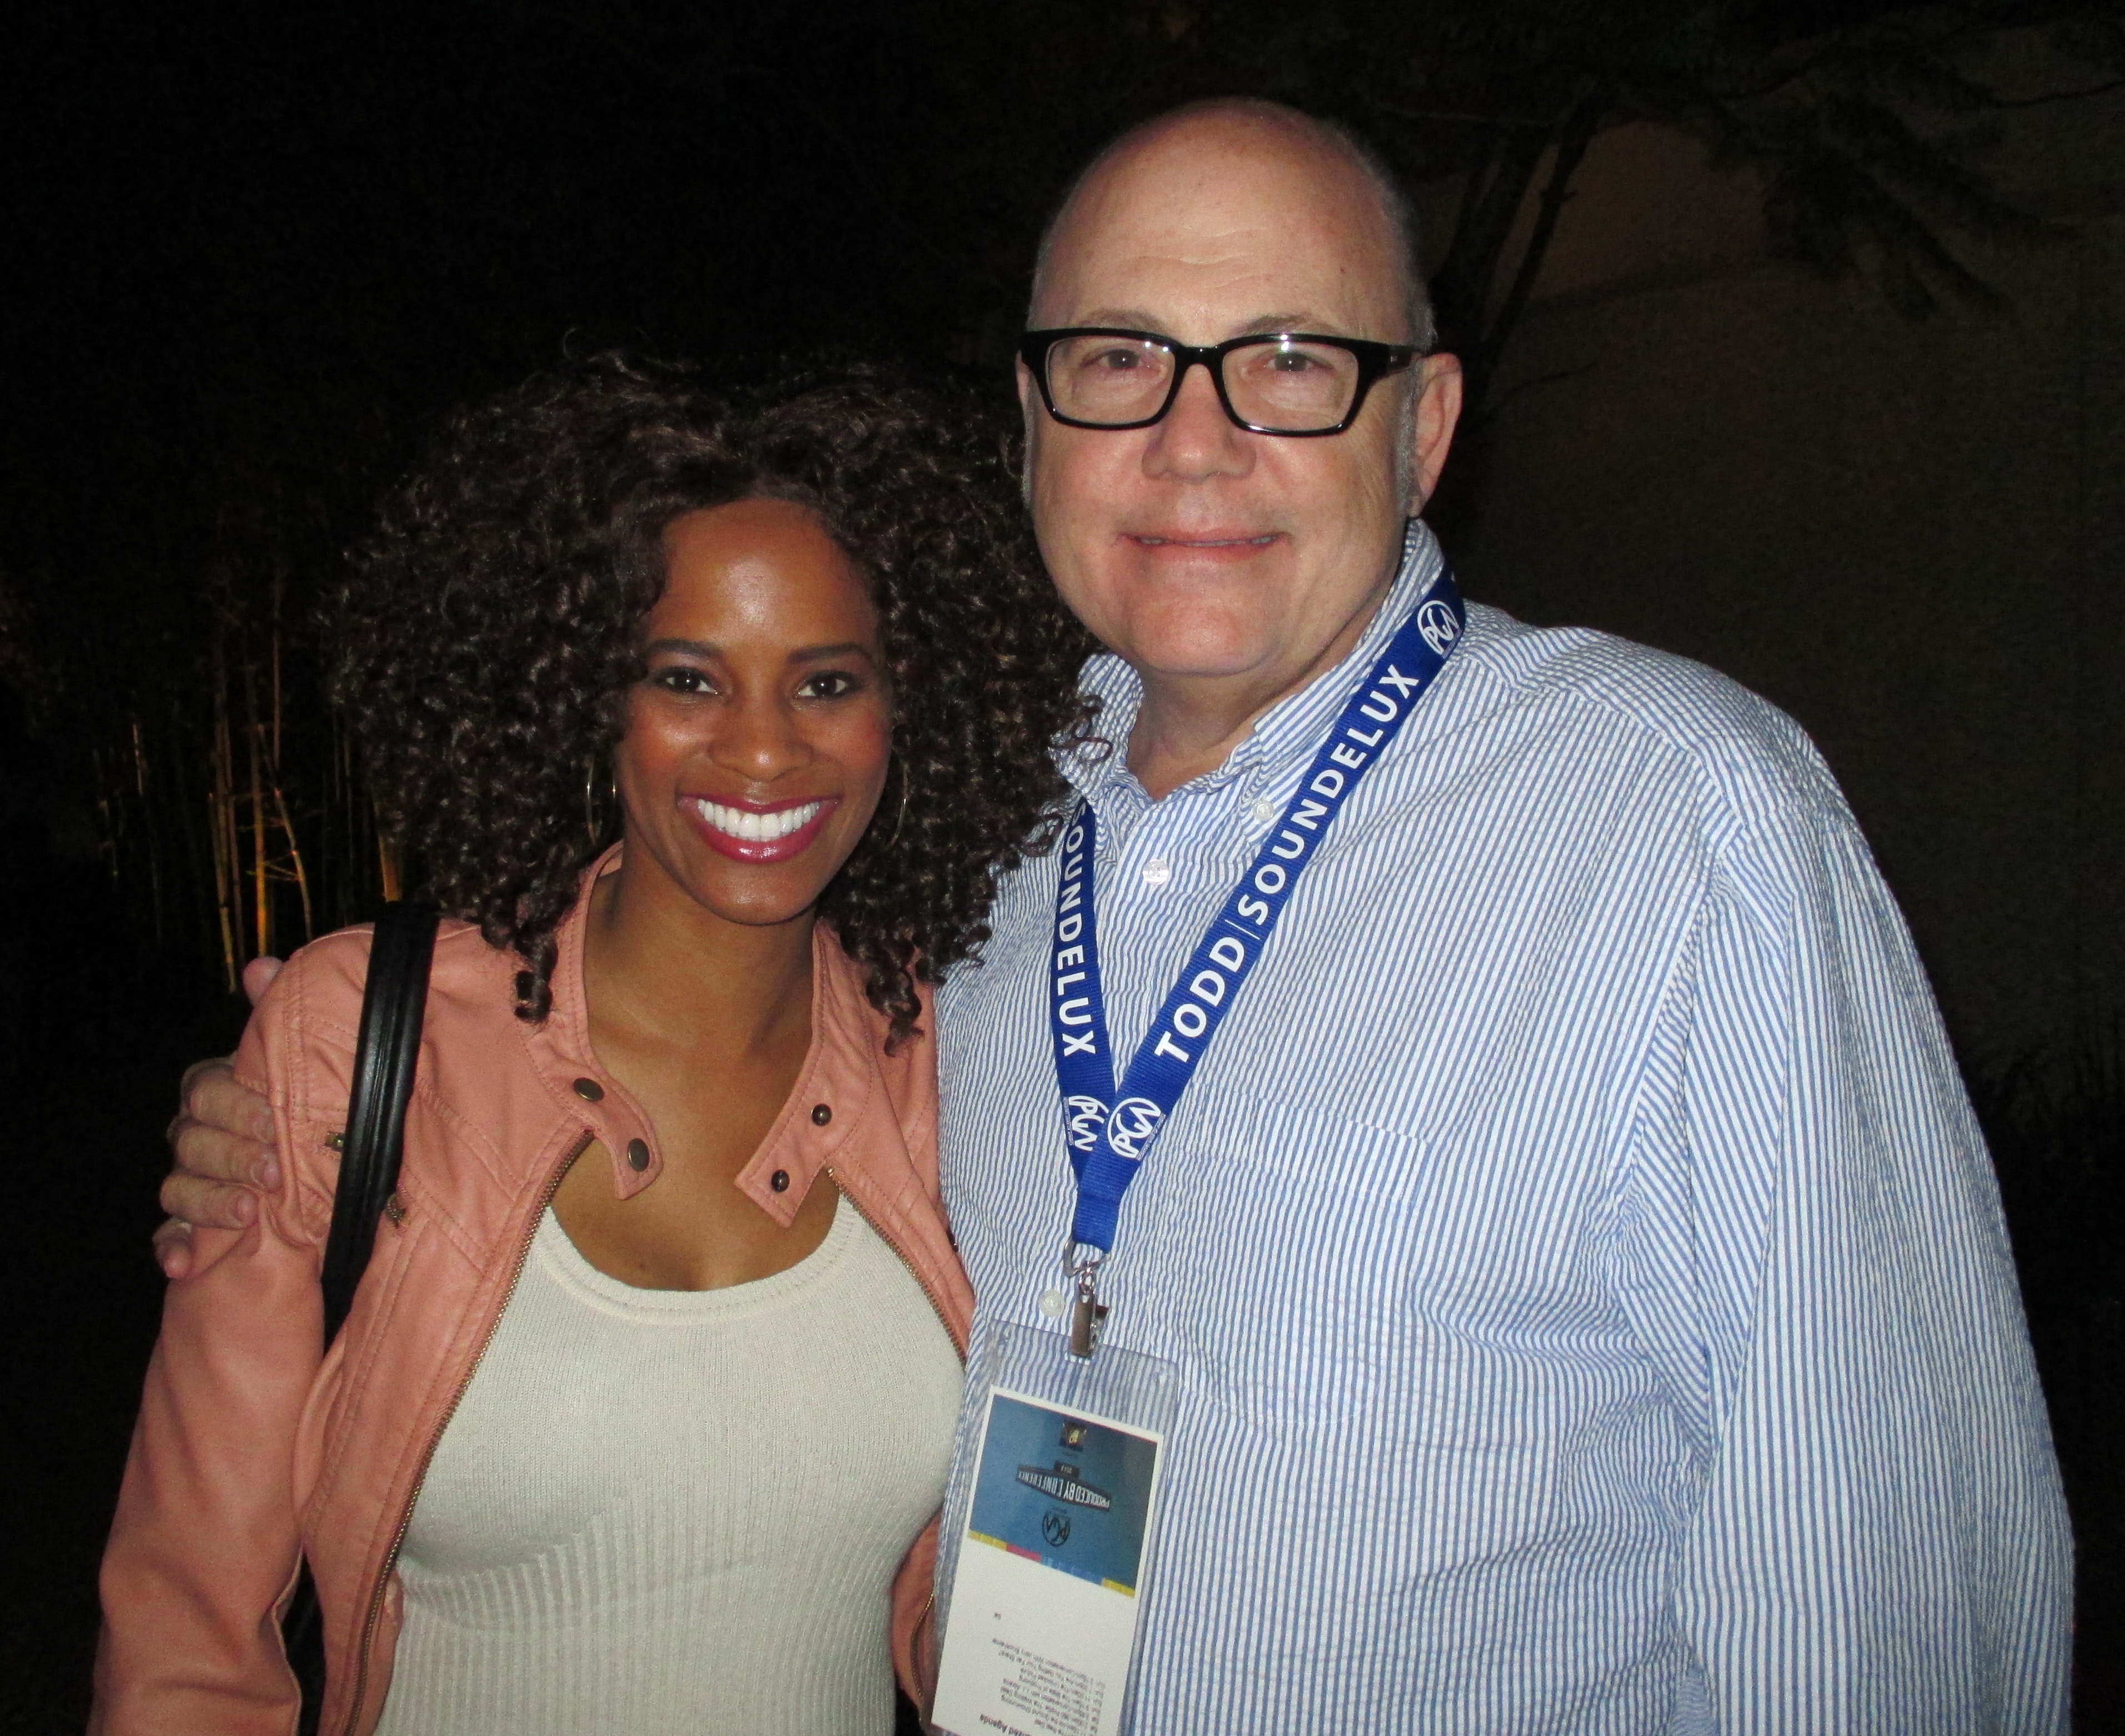 Actress Germany Kent with Producer Tim Gibbons, Curb your enthusiasm and Real Husbands Producer